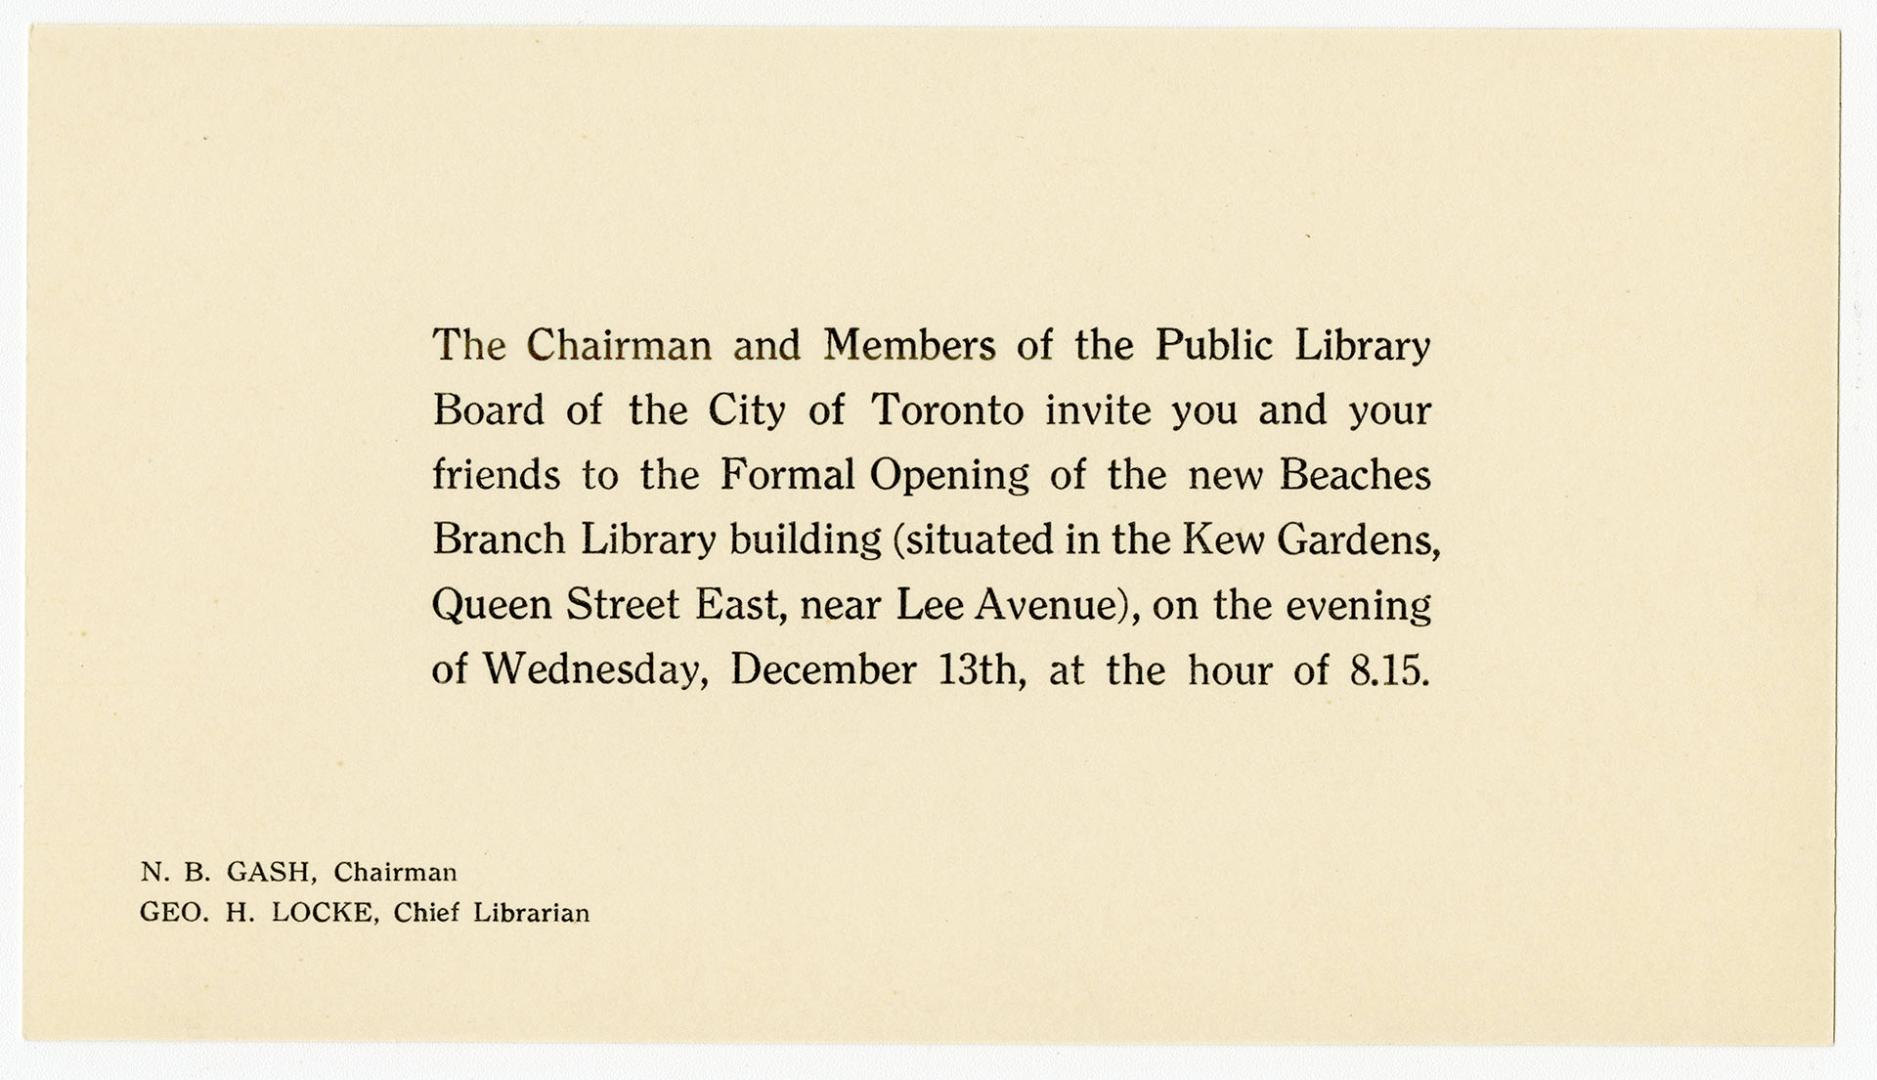 The chairman and members of the Public Library Board of the City of Toronto invite you and your friends to the formal opening of the new Beaches Branch Library building